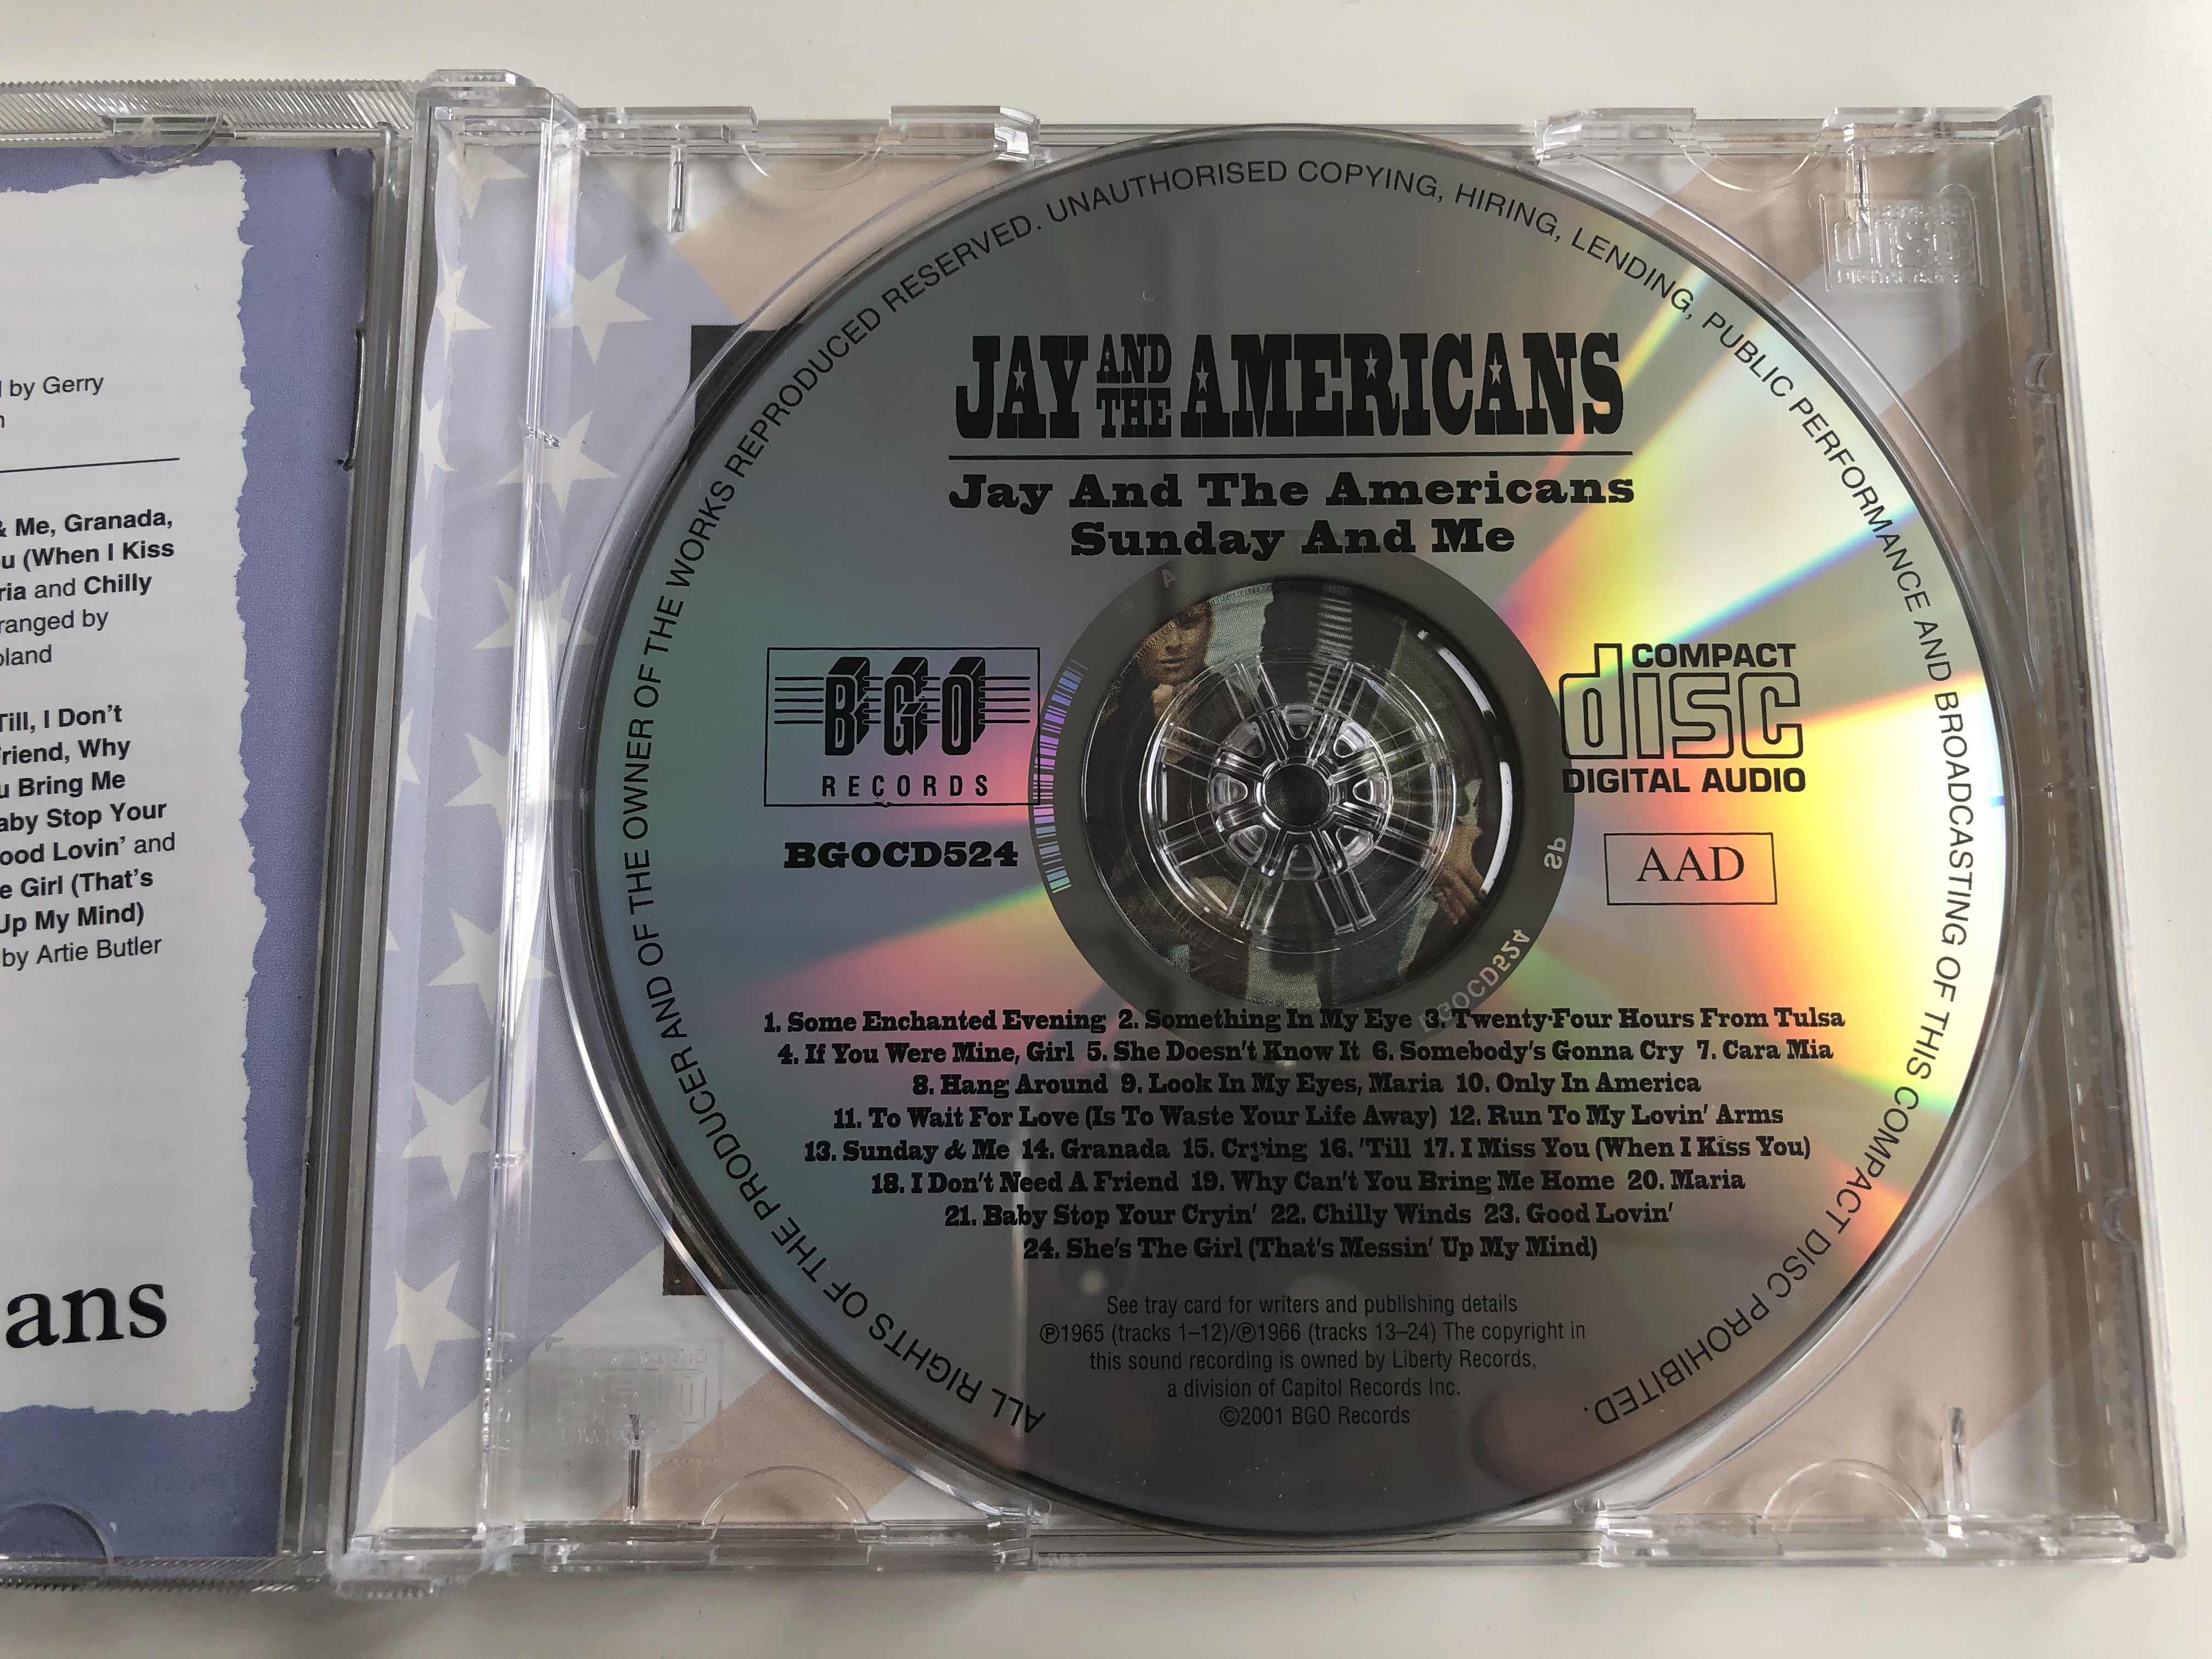 jay-and-the-americans-jay-the-americans-sunday-and-me-bgo-records-audio-cd-2001-bgocd524-6-.jpg